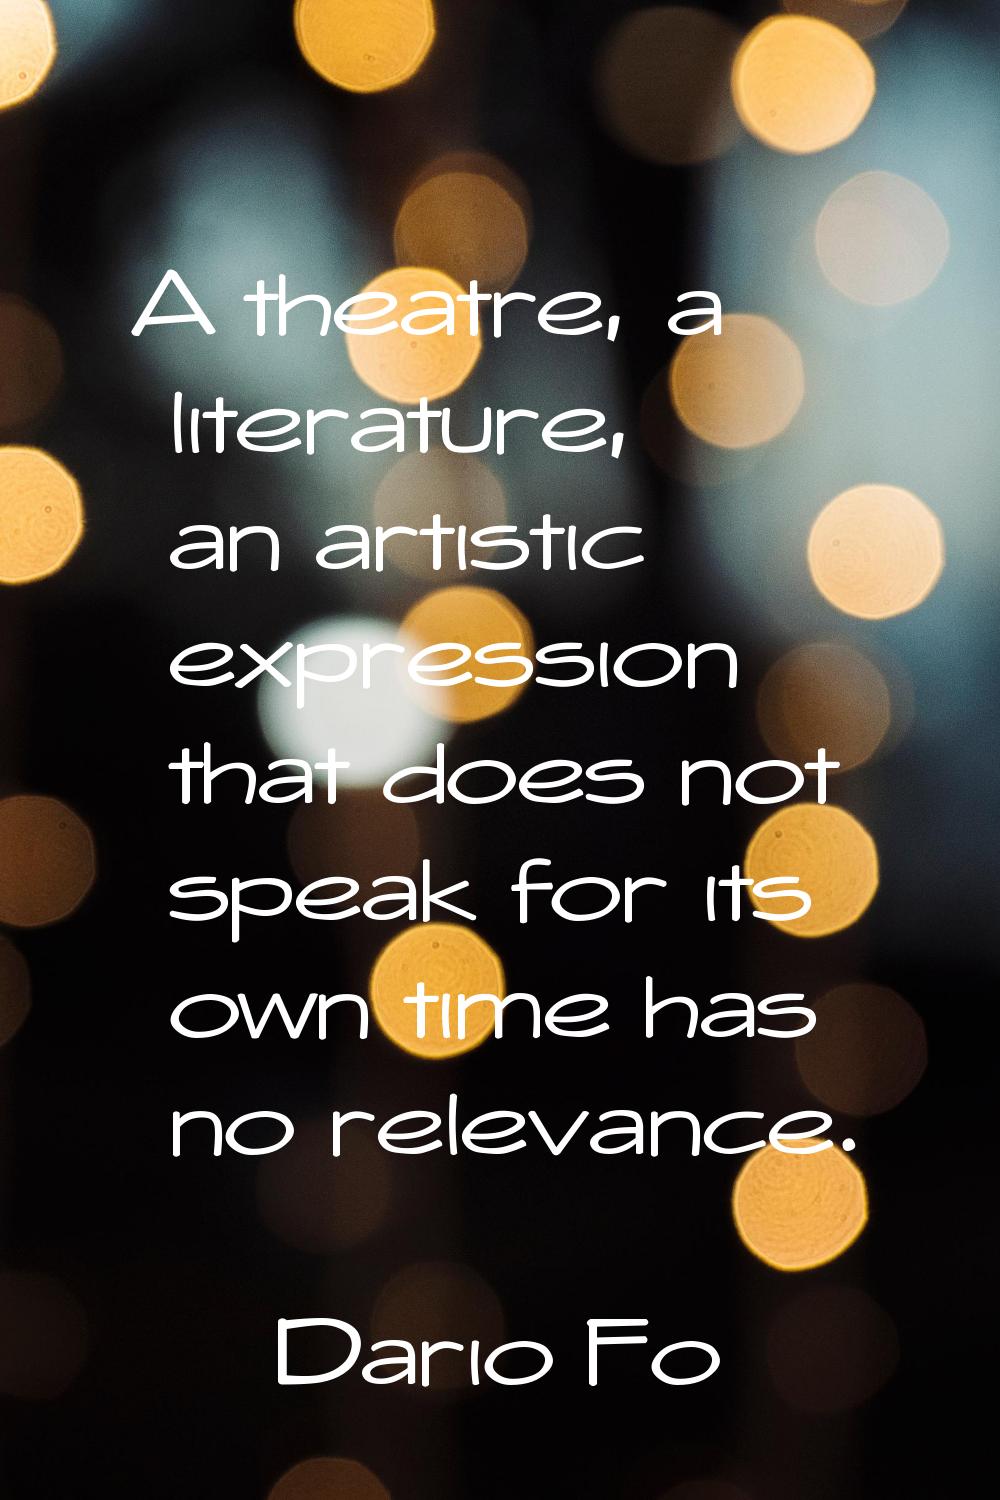 A theatre, a literature, an artistic expression that does not speak for its own time has no relevan